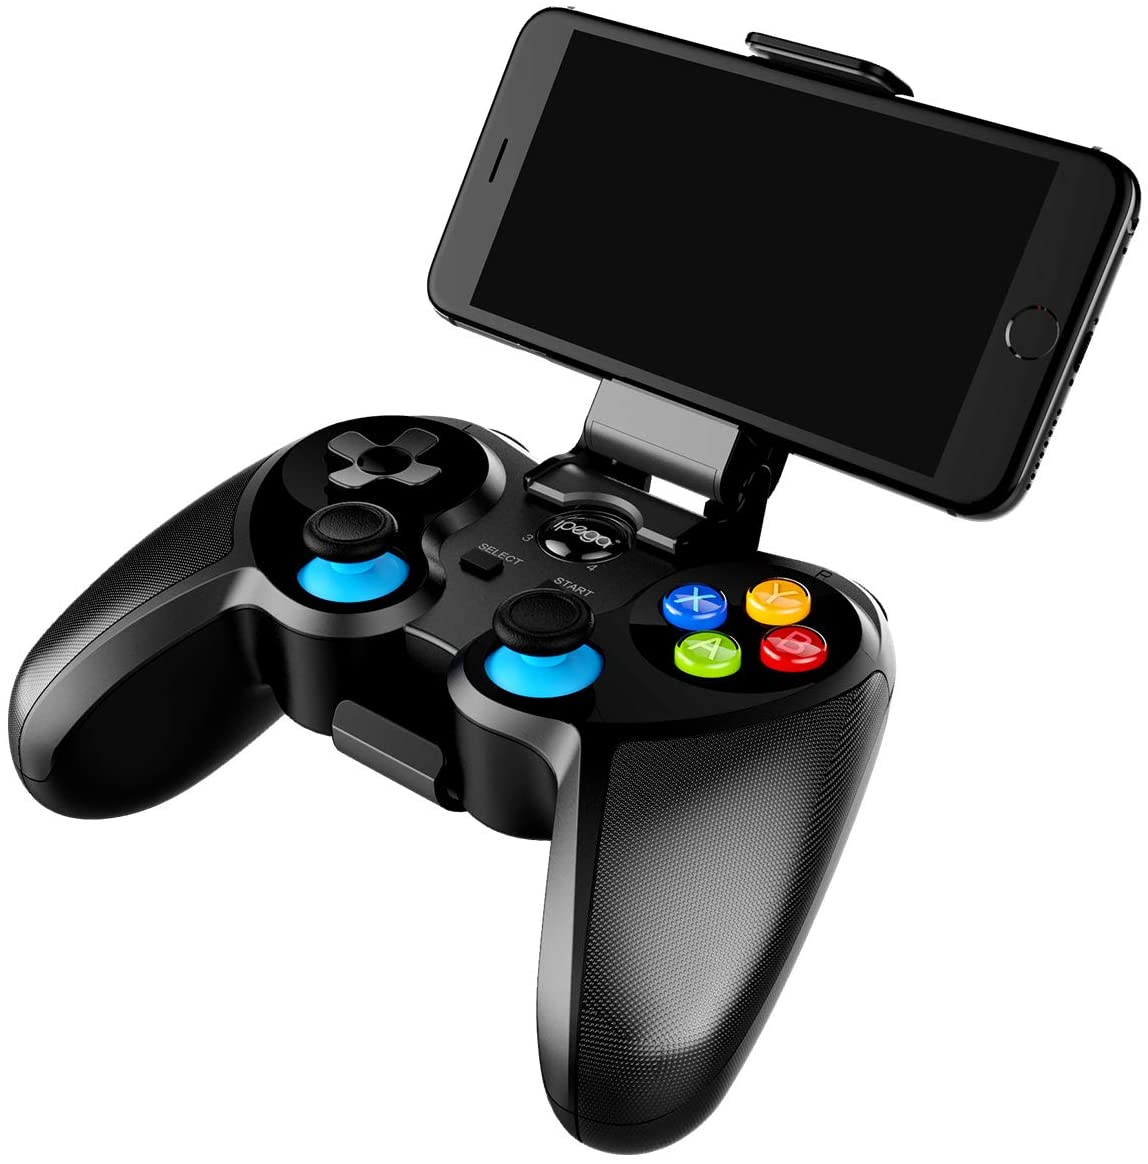 BEST GAME CONTROLLERS FOR iPHONE